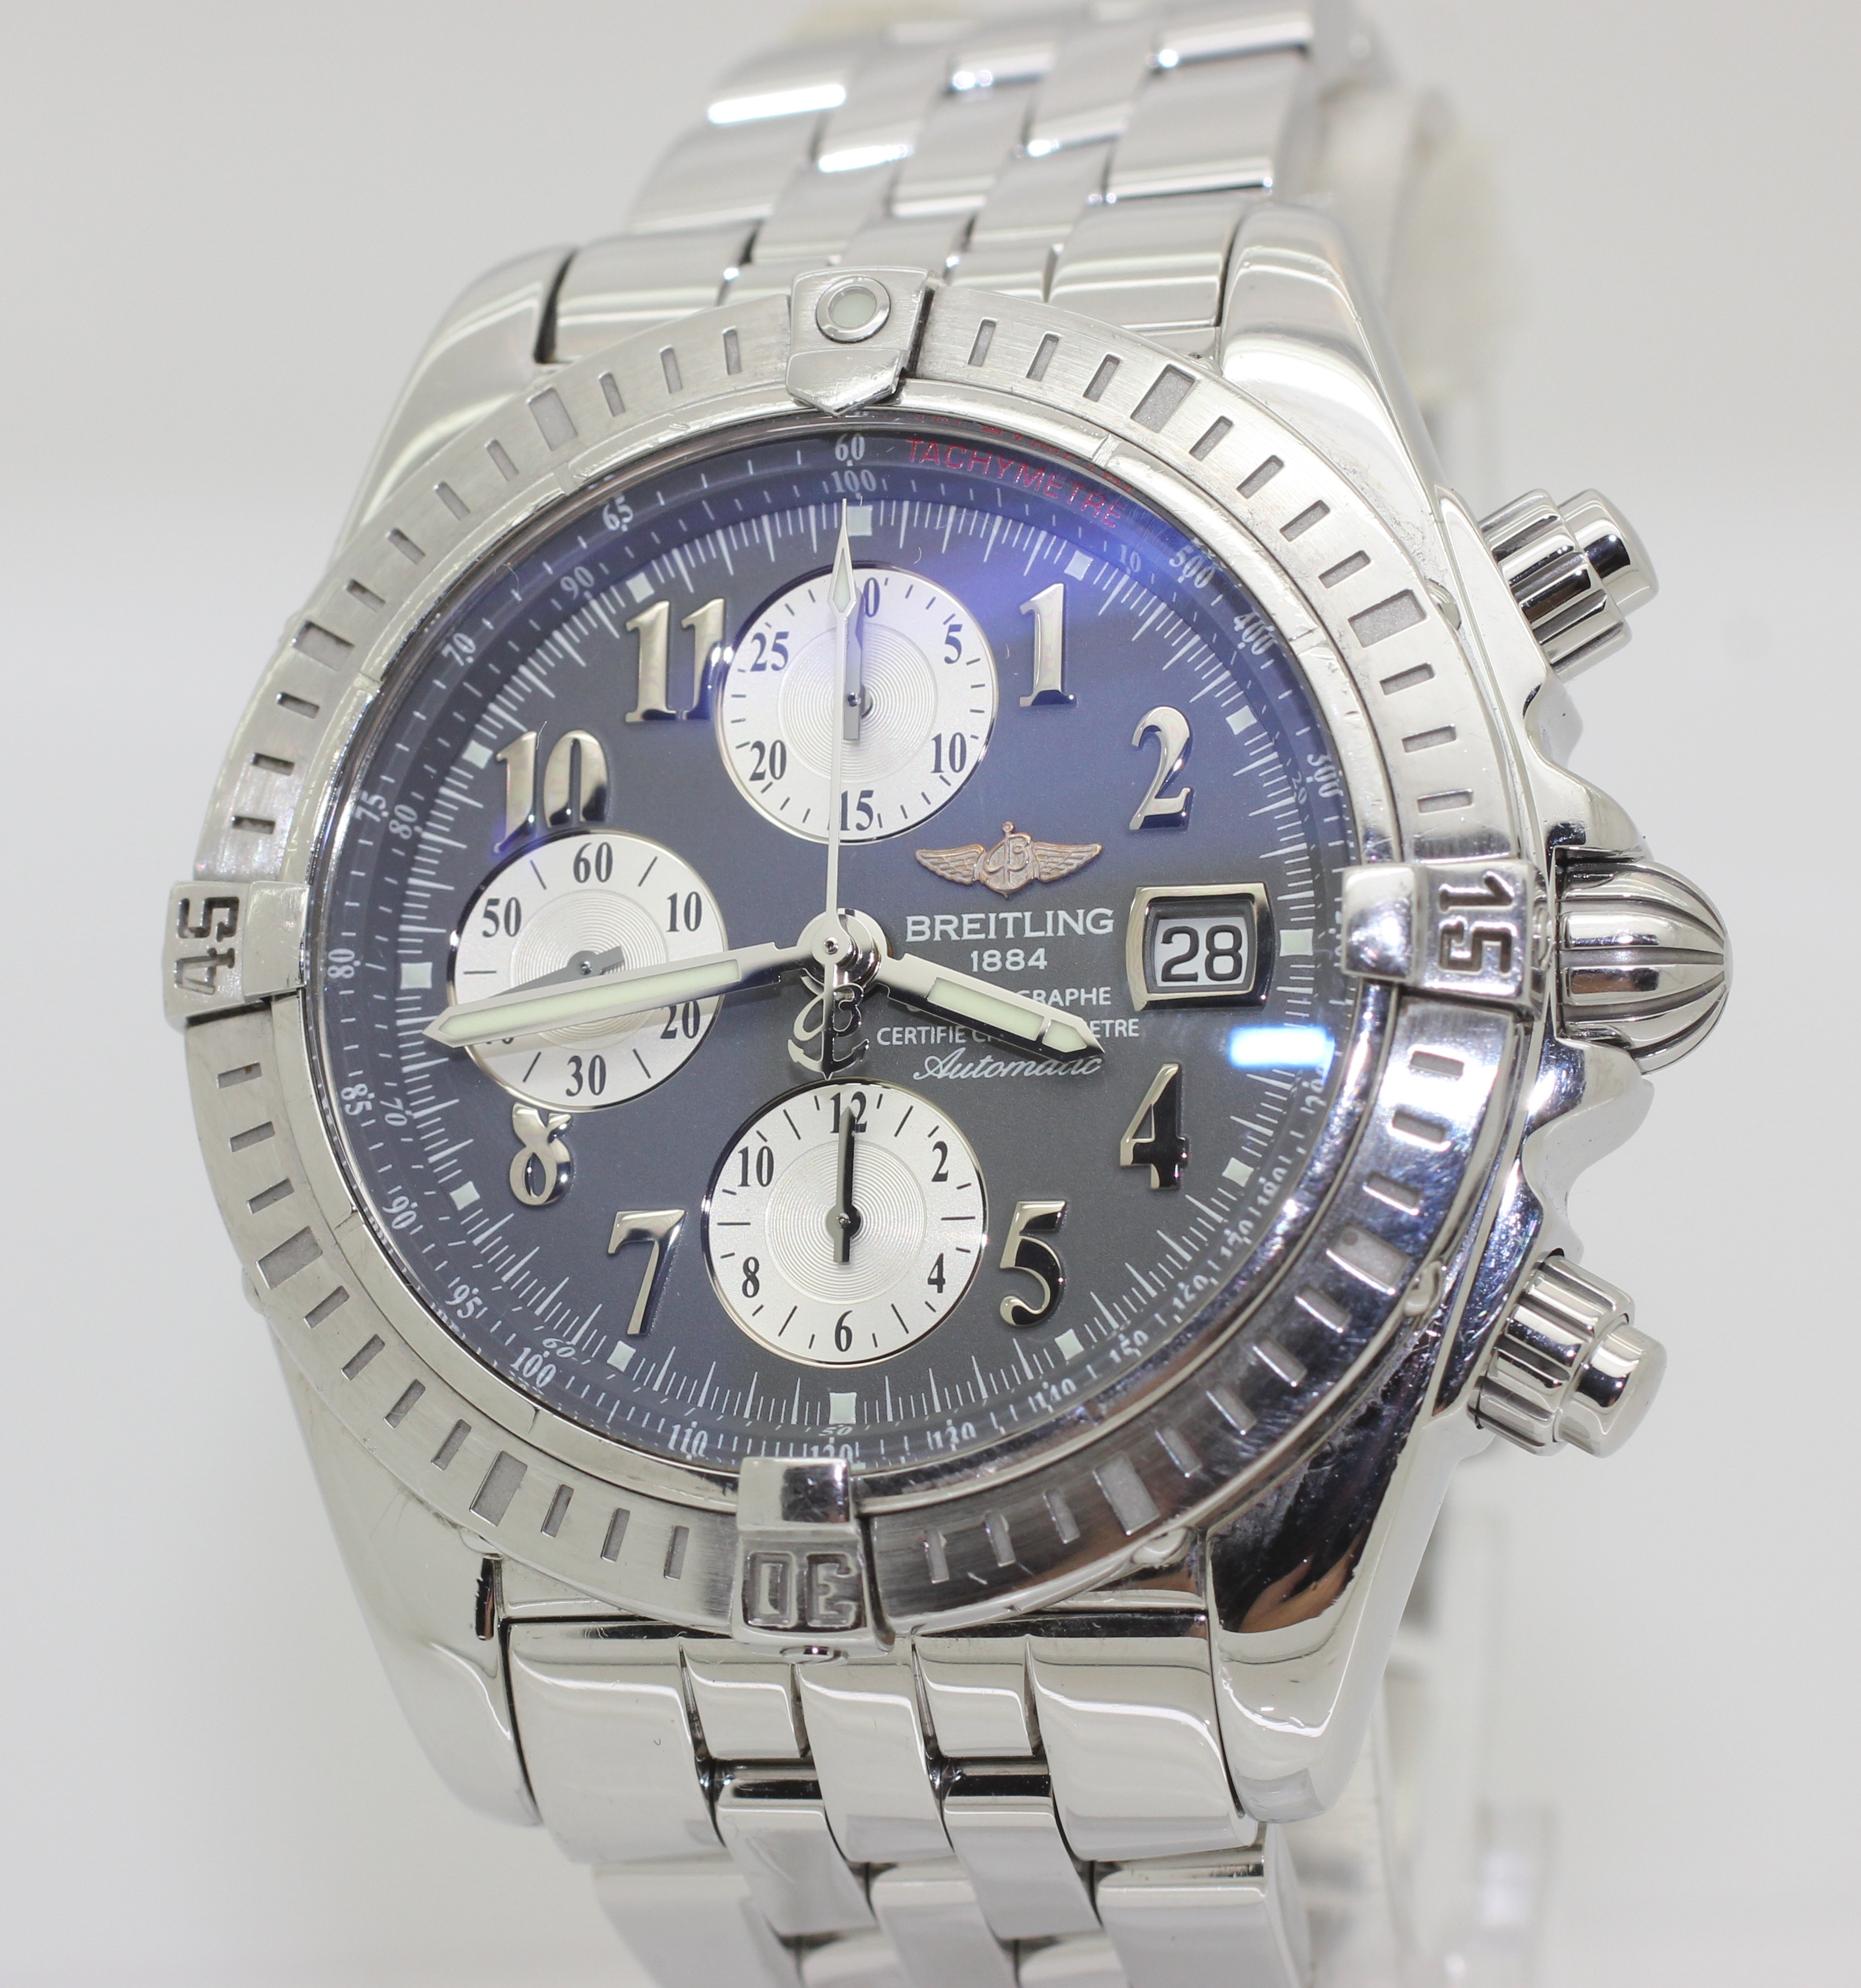 2006 Stainless Steel Breitling Chronomat Evolution Automatic Chronograph A13356